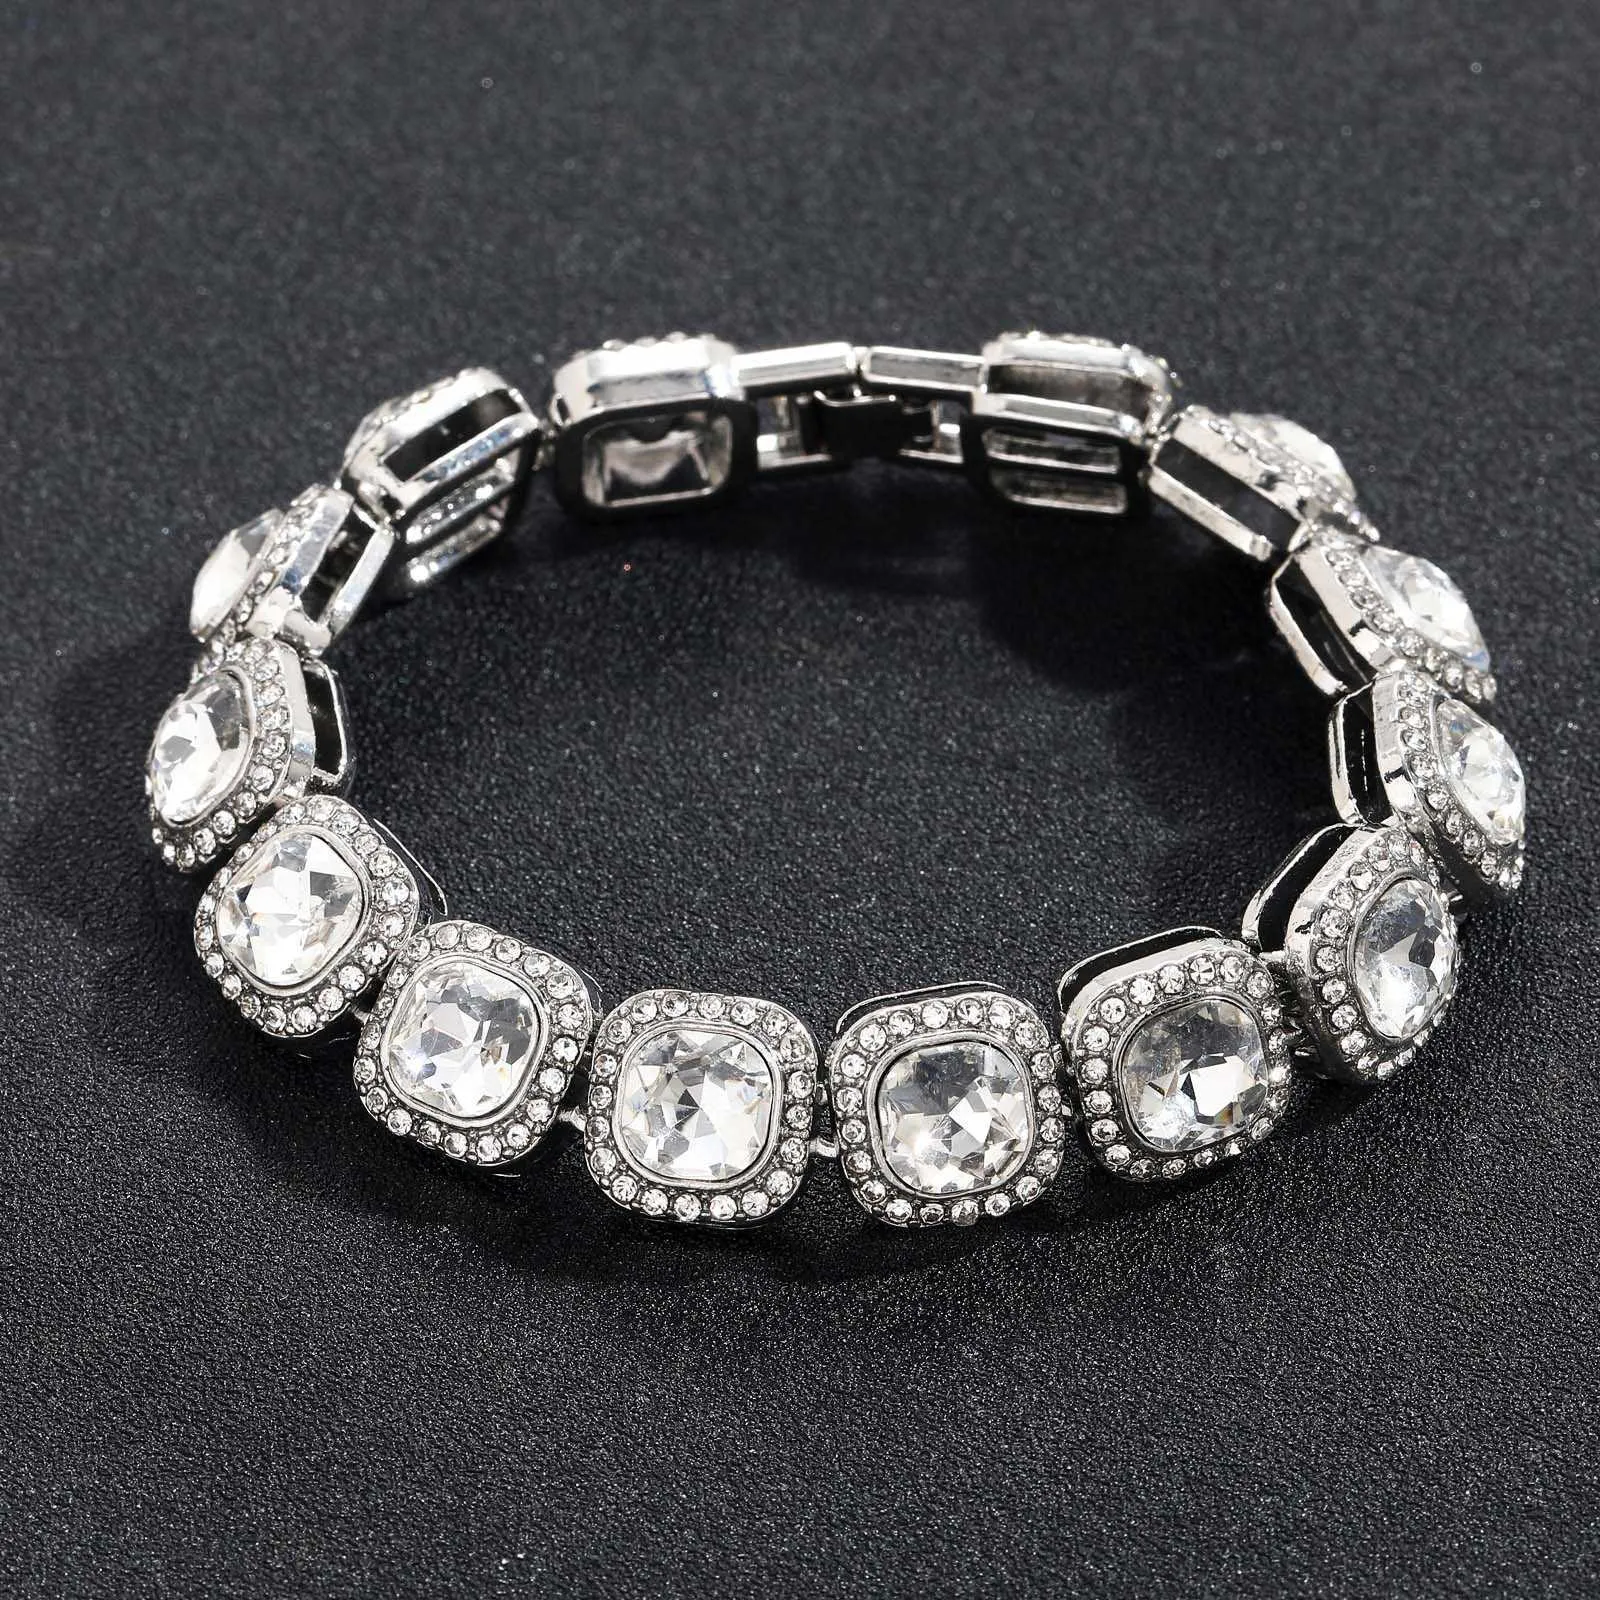 Wolf Tide 13mm Square Clustered Crystal Armband Iced Out Rhinestone Crystal Sugar Cuban Link Chain Hip Hop Mens Bangle Armband Party Club Rapper Bijoux Gifts